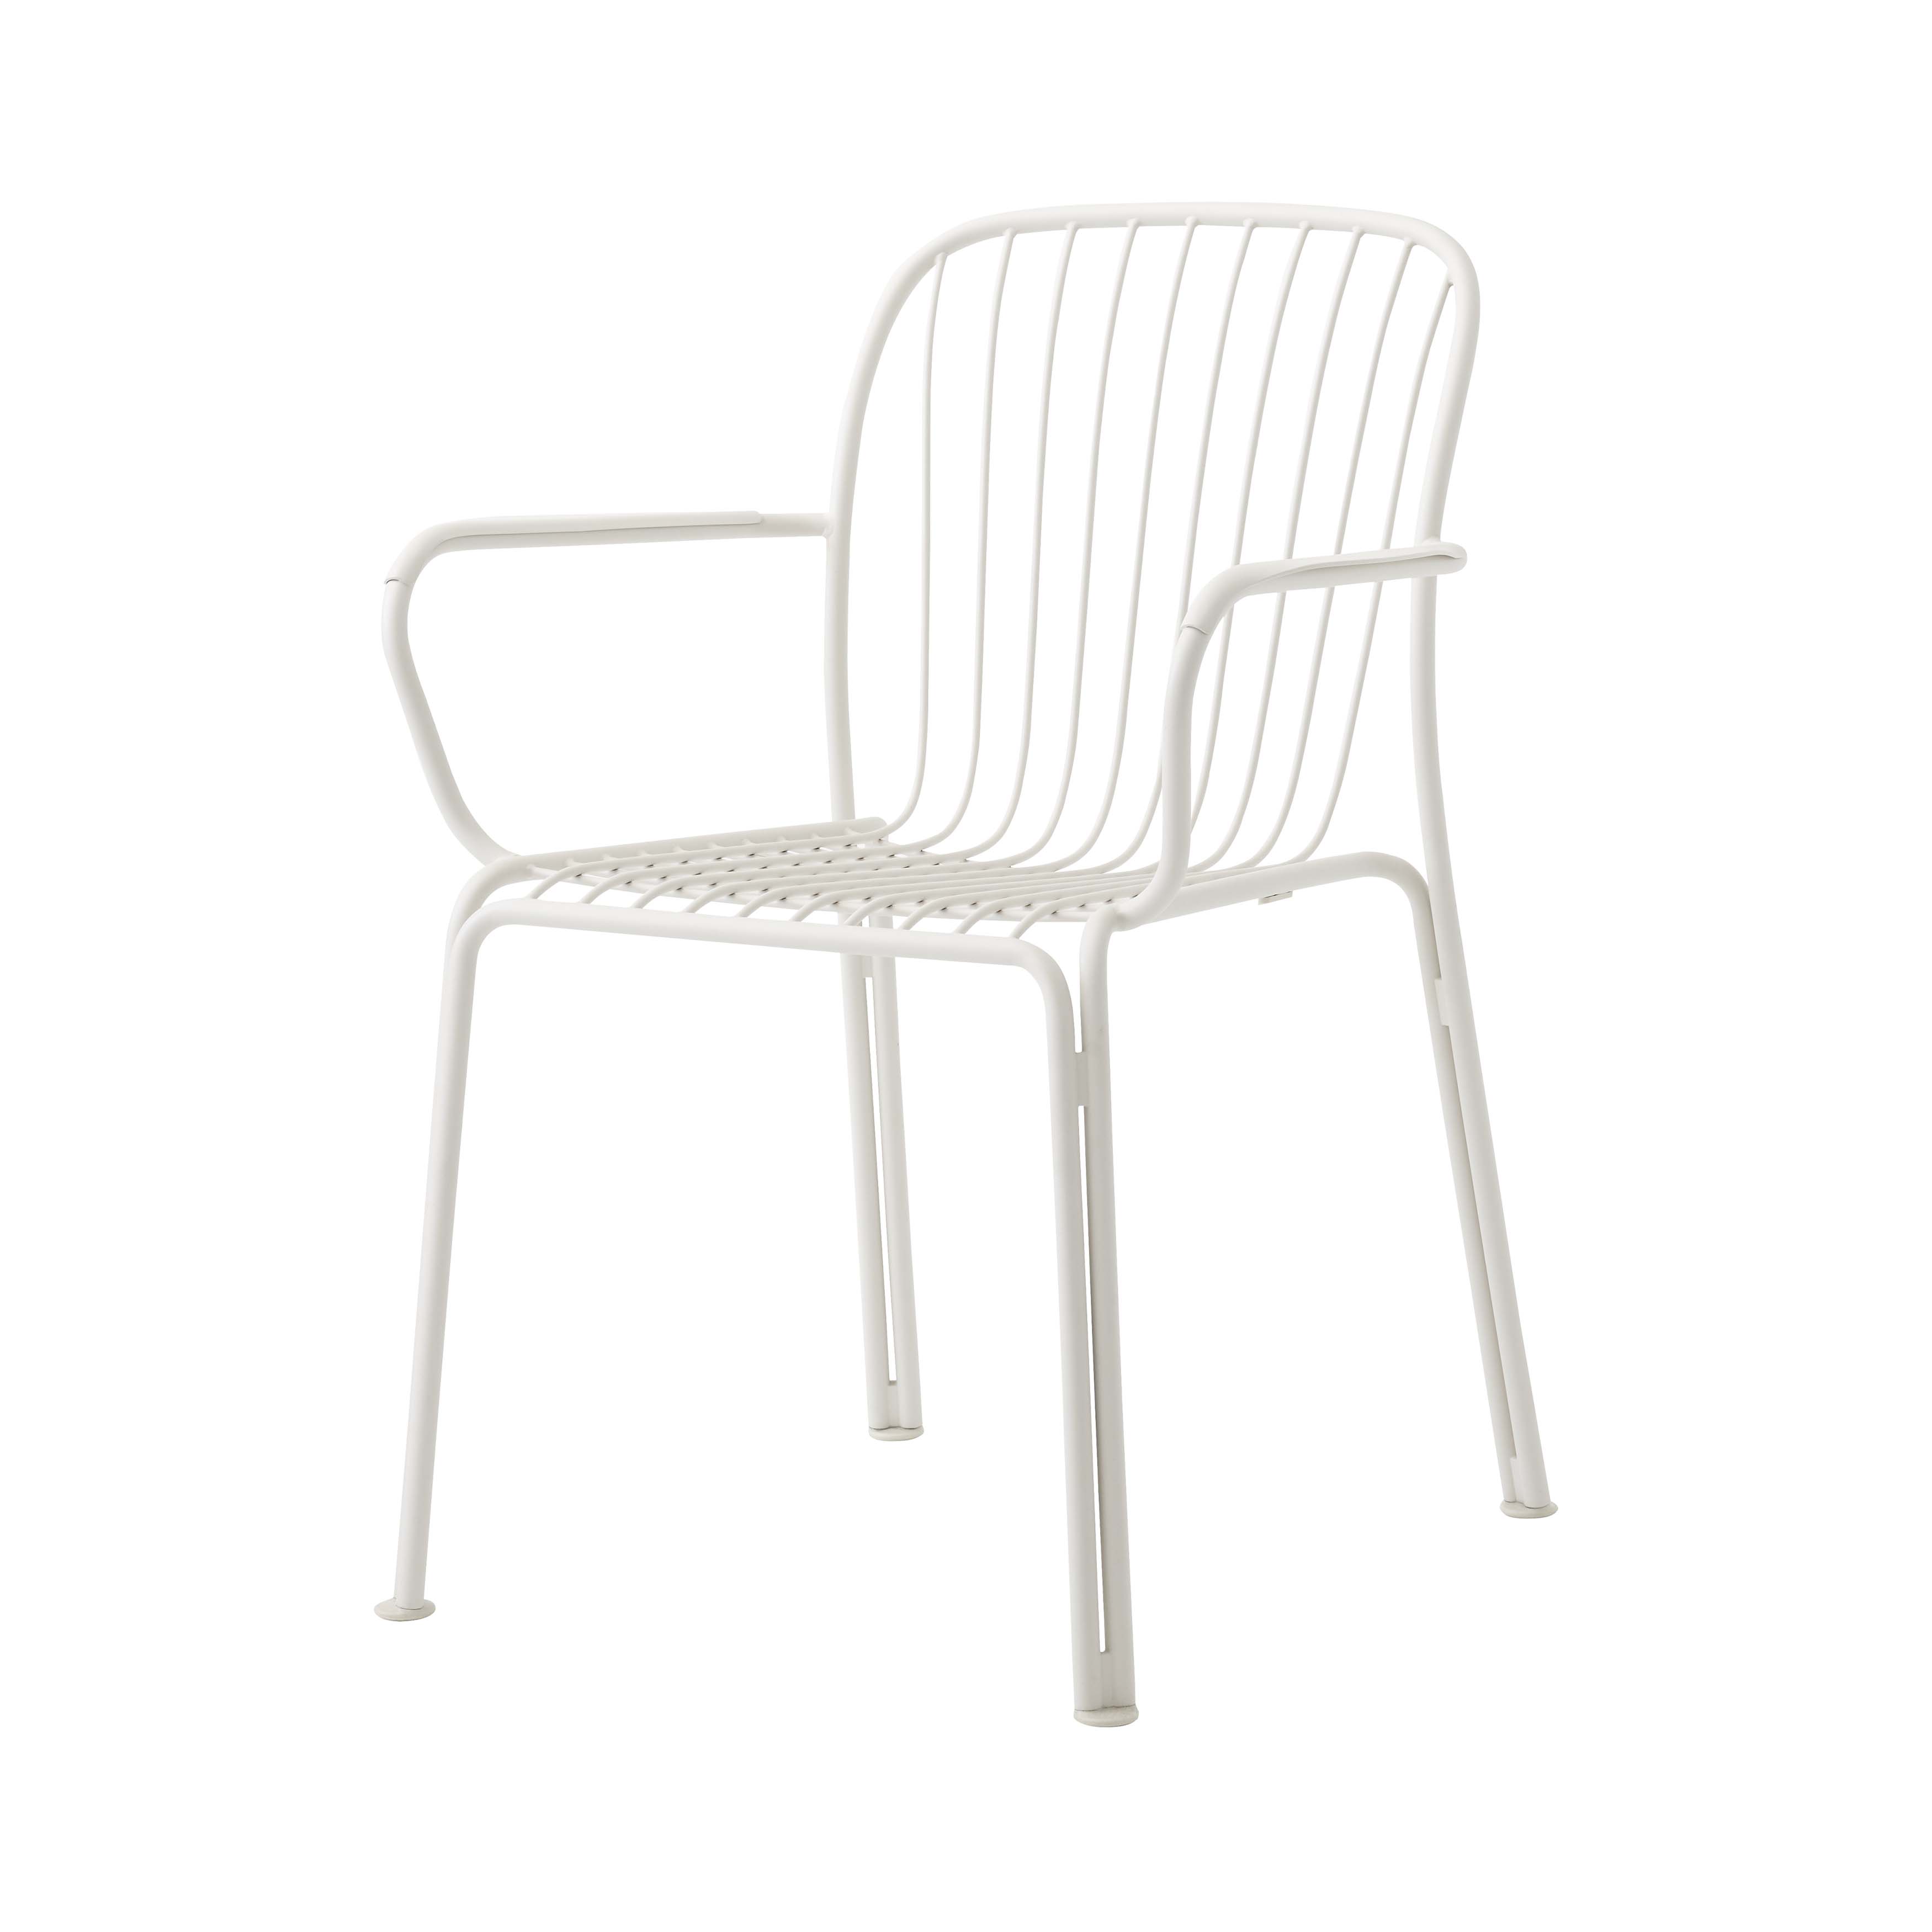 Thorvald SC95 Armchair: Outdoor + Ivory + Without Cushion